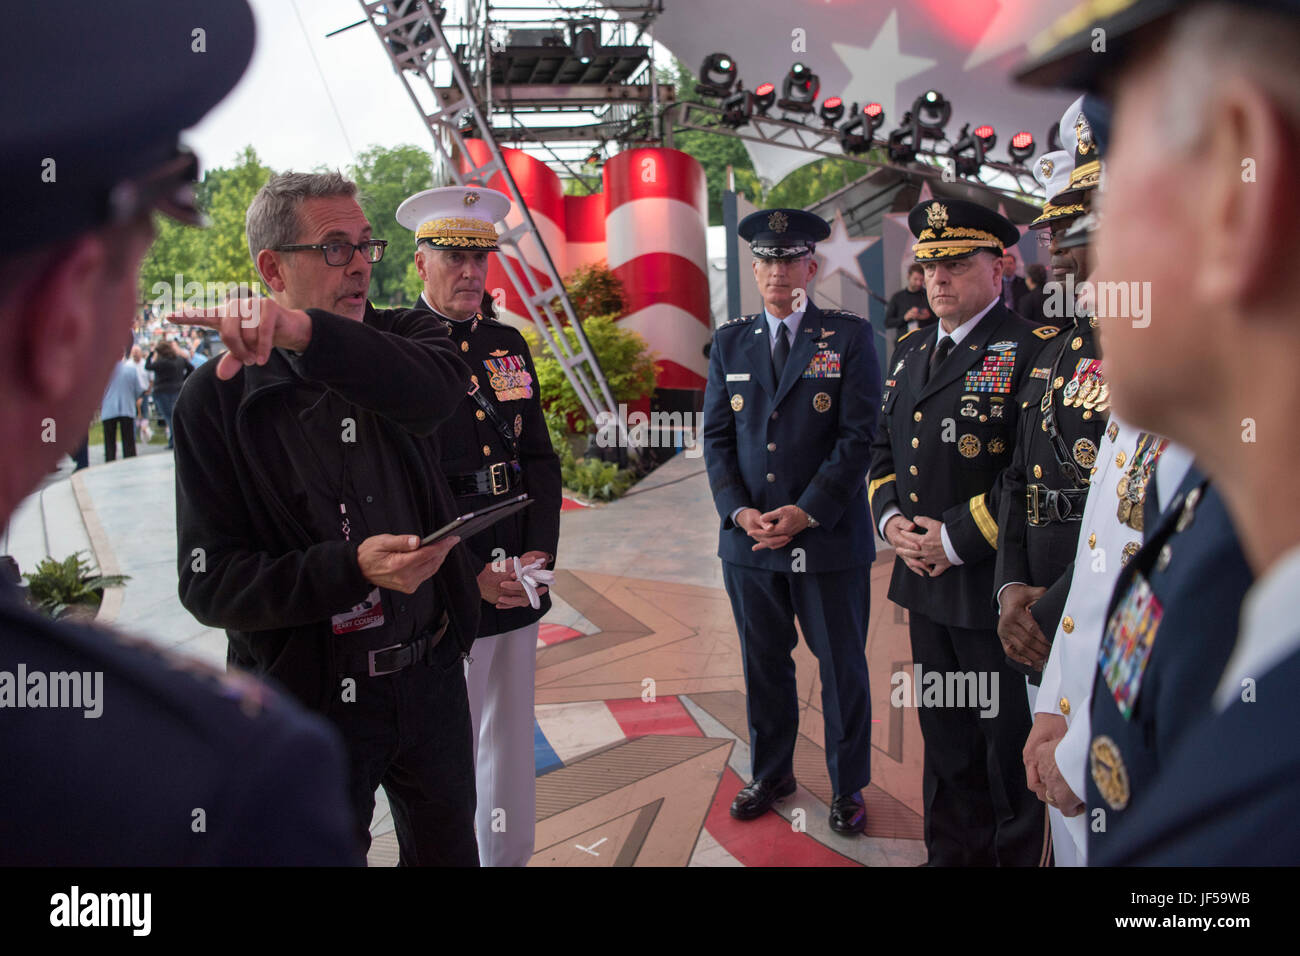 A stage manager gives instruction Marine Corps Gen. Joseph F. Dunford Jr., chairman of the Joint Chiefs of Staff, and the Joint Chiefs before the National Memorial Day Concert at the west lawn of the U.S. Capitol, Washington, D.C., May 28, 2017. The concert’s mission is to unite the country in remembrance and appreciation of the fallen and to serve those who are grieving. (Dept. of Defense photo by Navy Petty Officer 2nd Class Dominique A. Pineiro/Released) Stock Photo